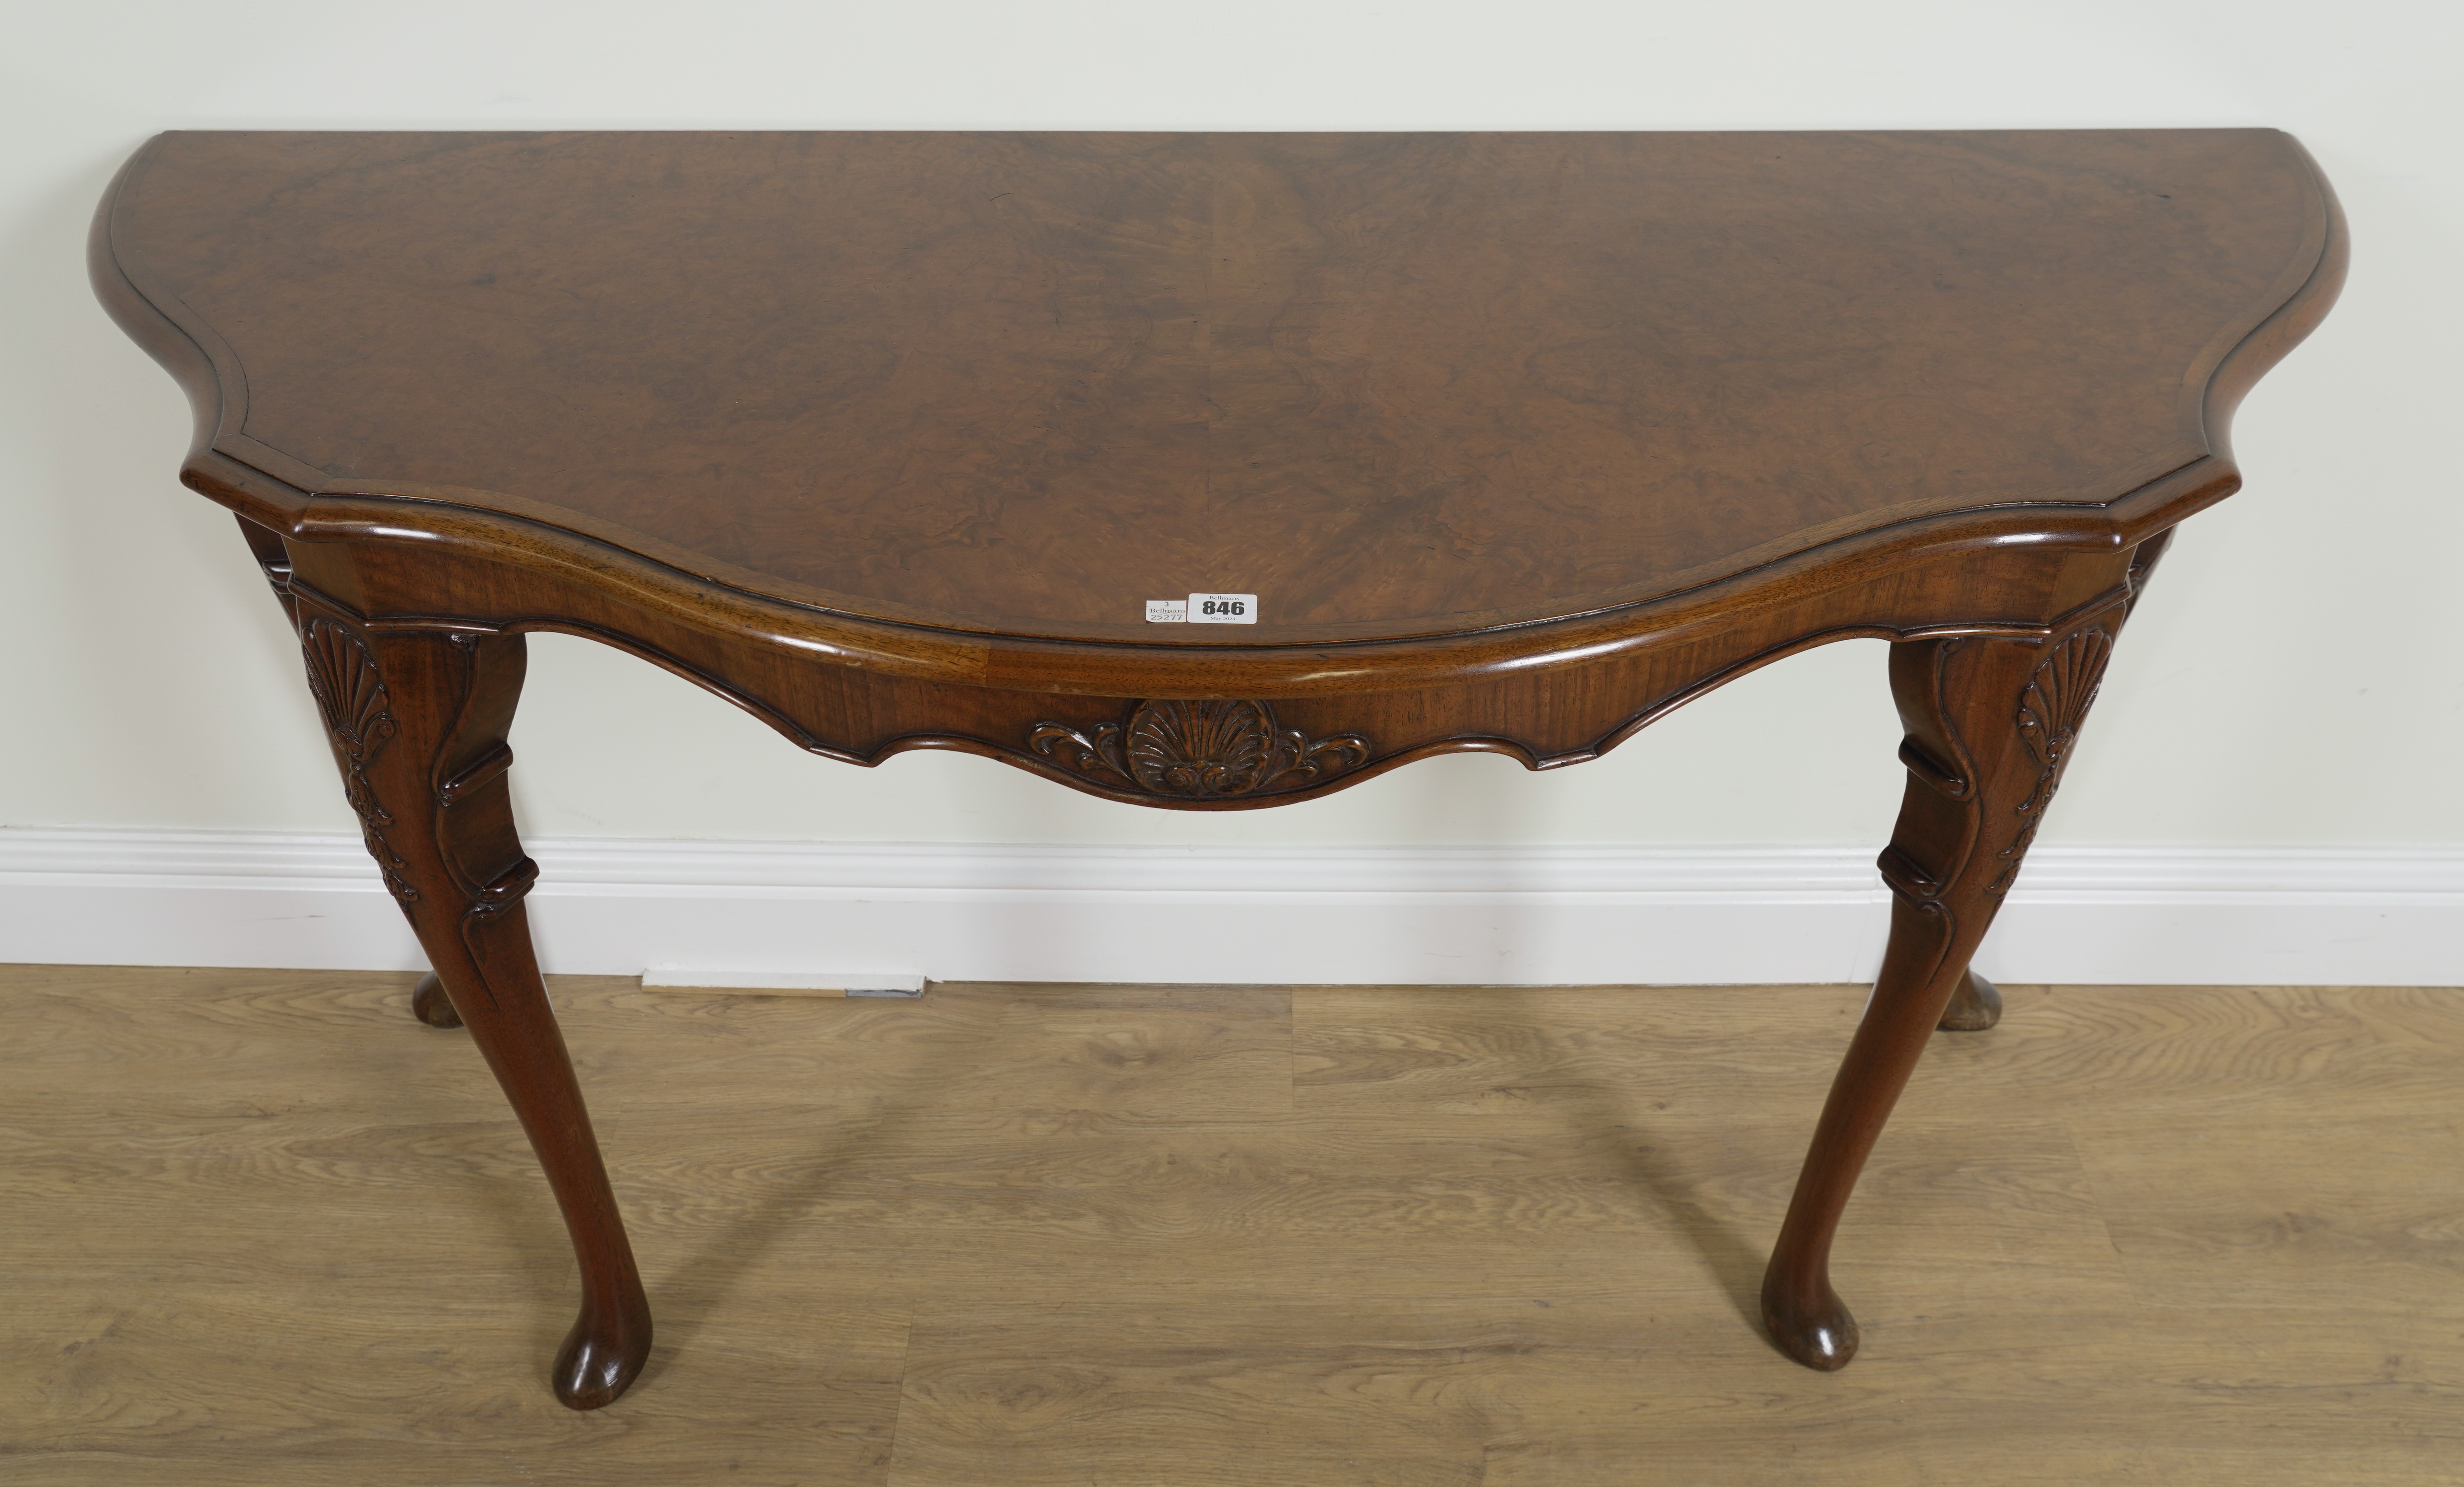 A GEORGE I STYLE FIGURED WALNUT CONSOLE TABLE - Image 2 of 2